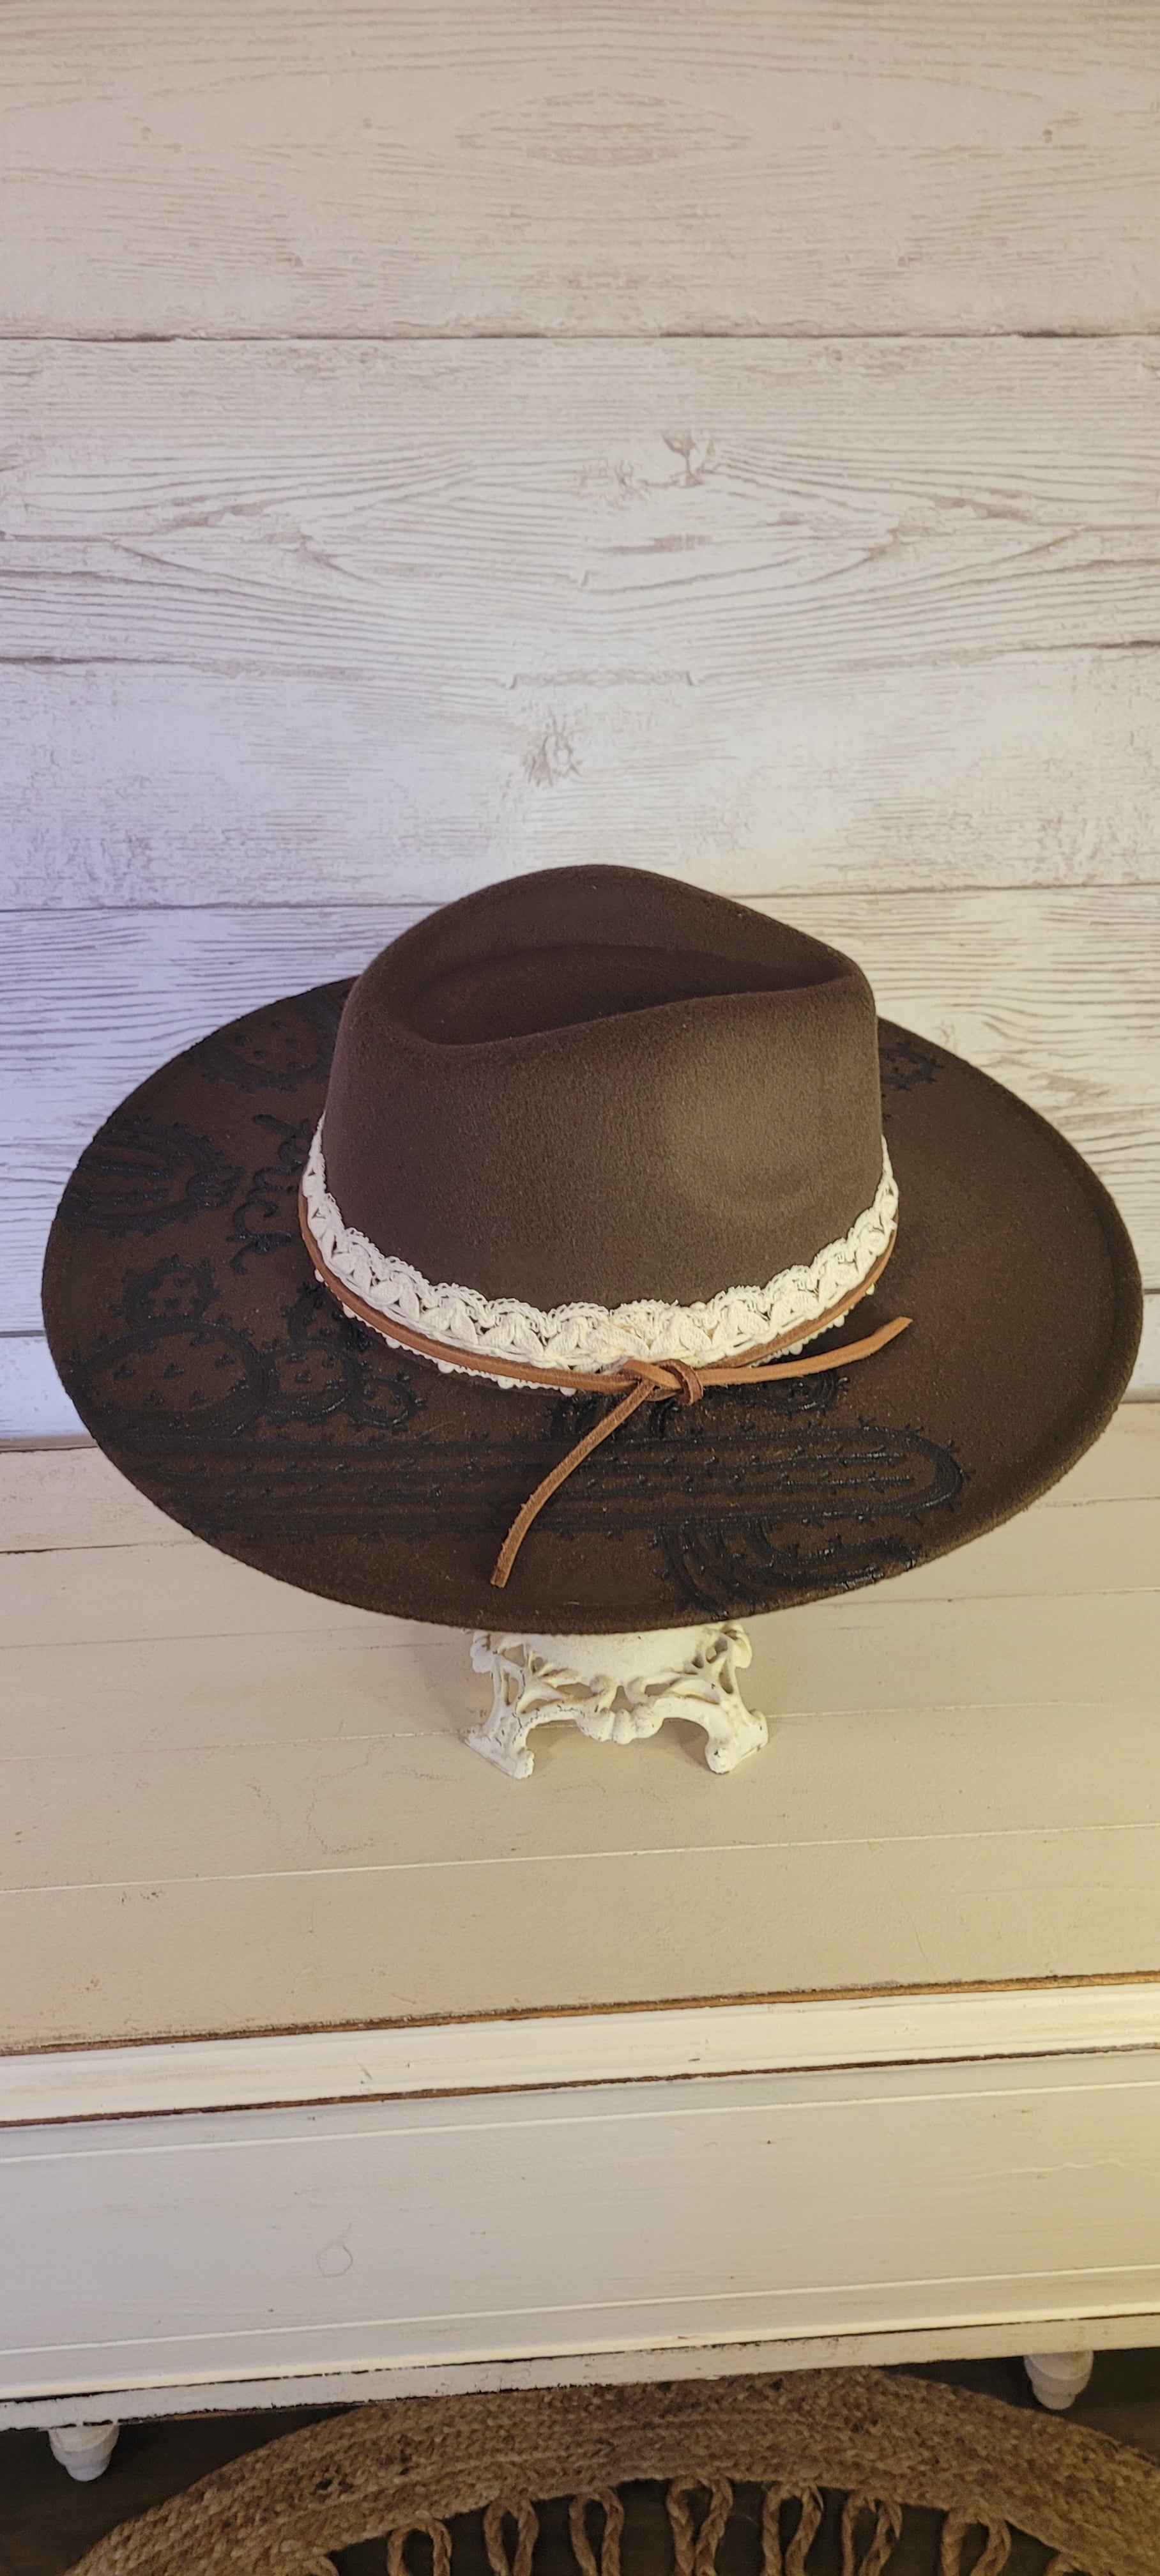 Features "don't be a prick", cactus & saguaro engraving Natural lace ribbon & leather band Felt hat Flat brim 65% polyester and 35% cotton Ribbon drawstring for hat size adjustment Head Circumference: 24" Crown Height: 5" Brim Length: 15.75" Brim Width: 14.5" Branded & numbered inside crown Custom designed by Kayla